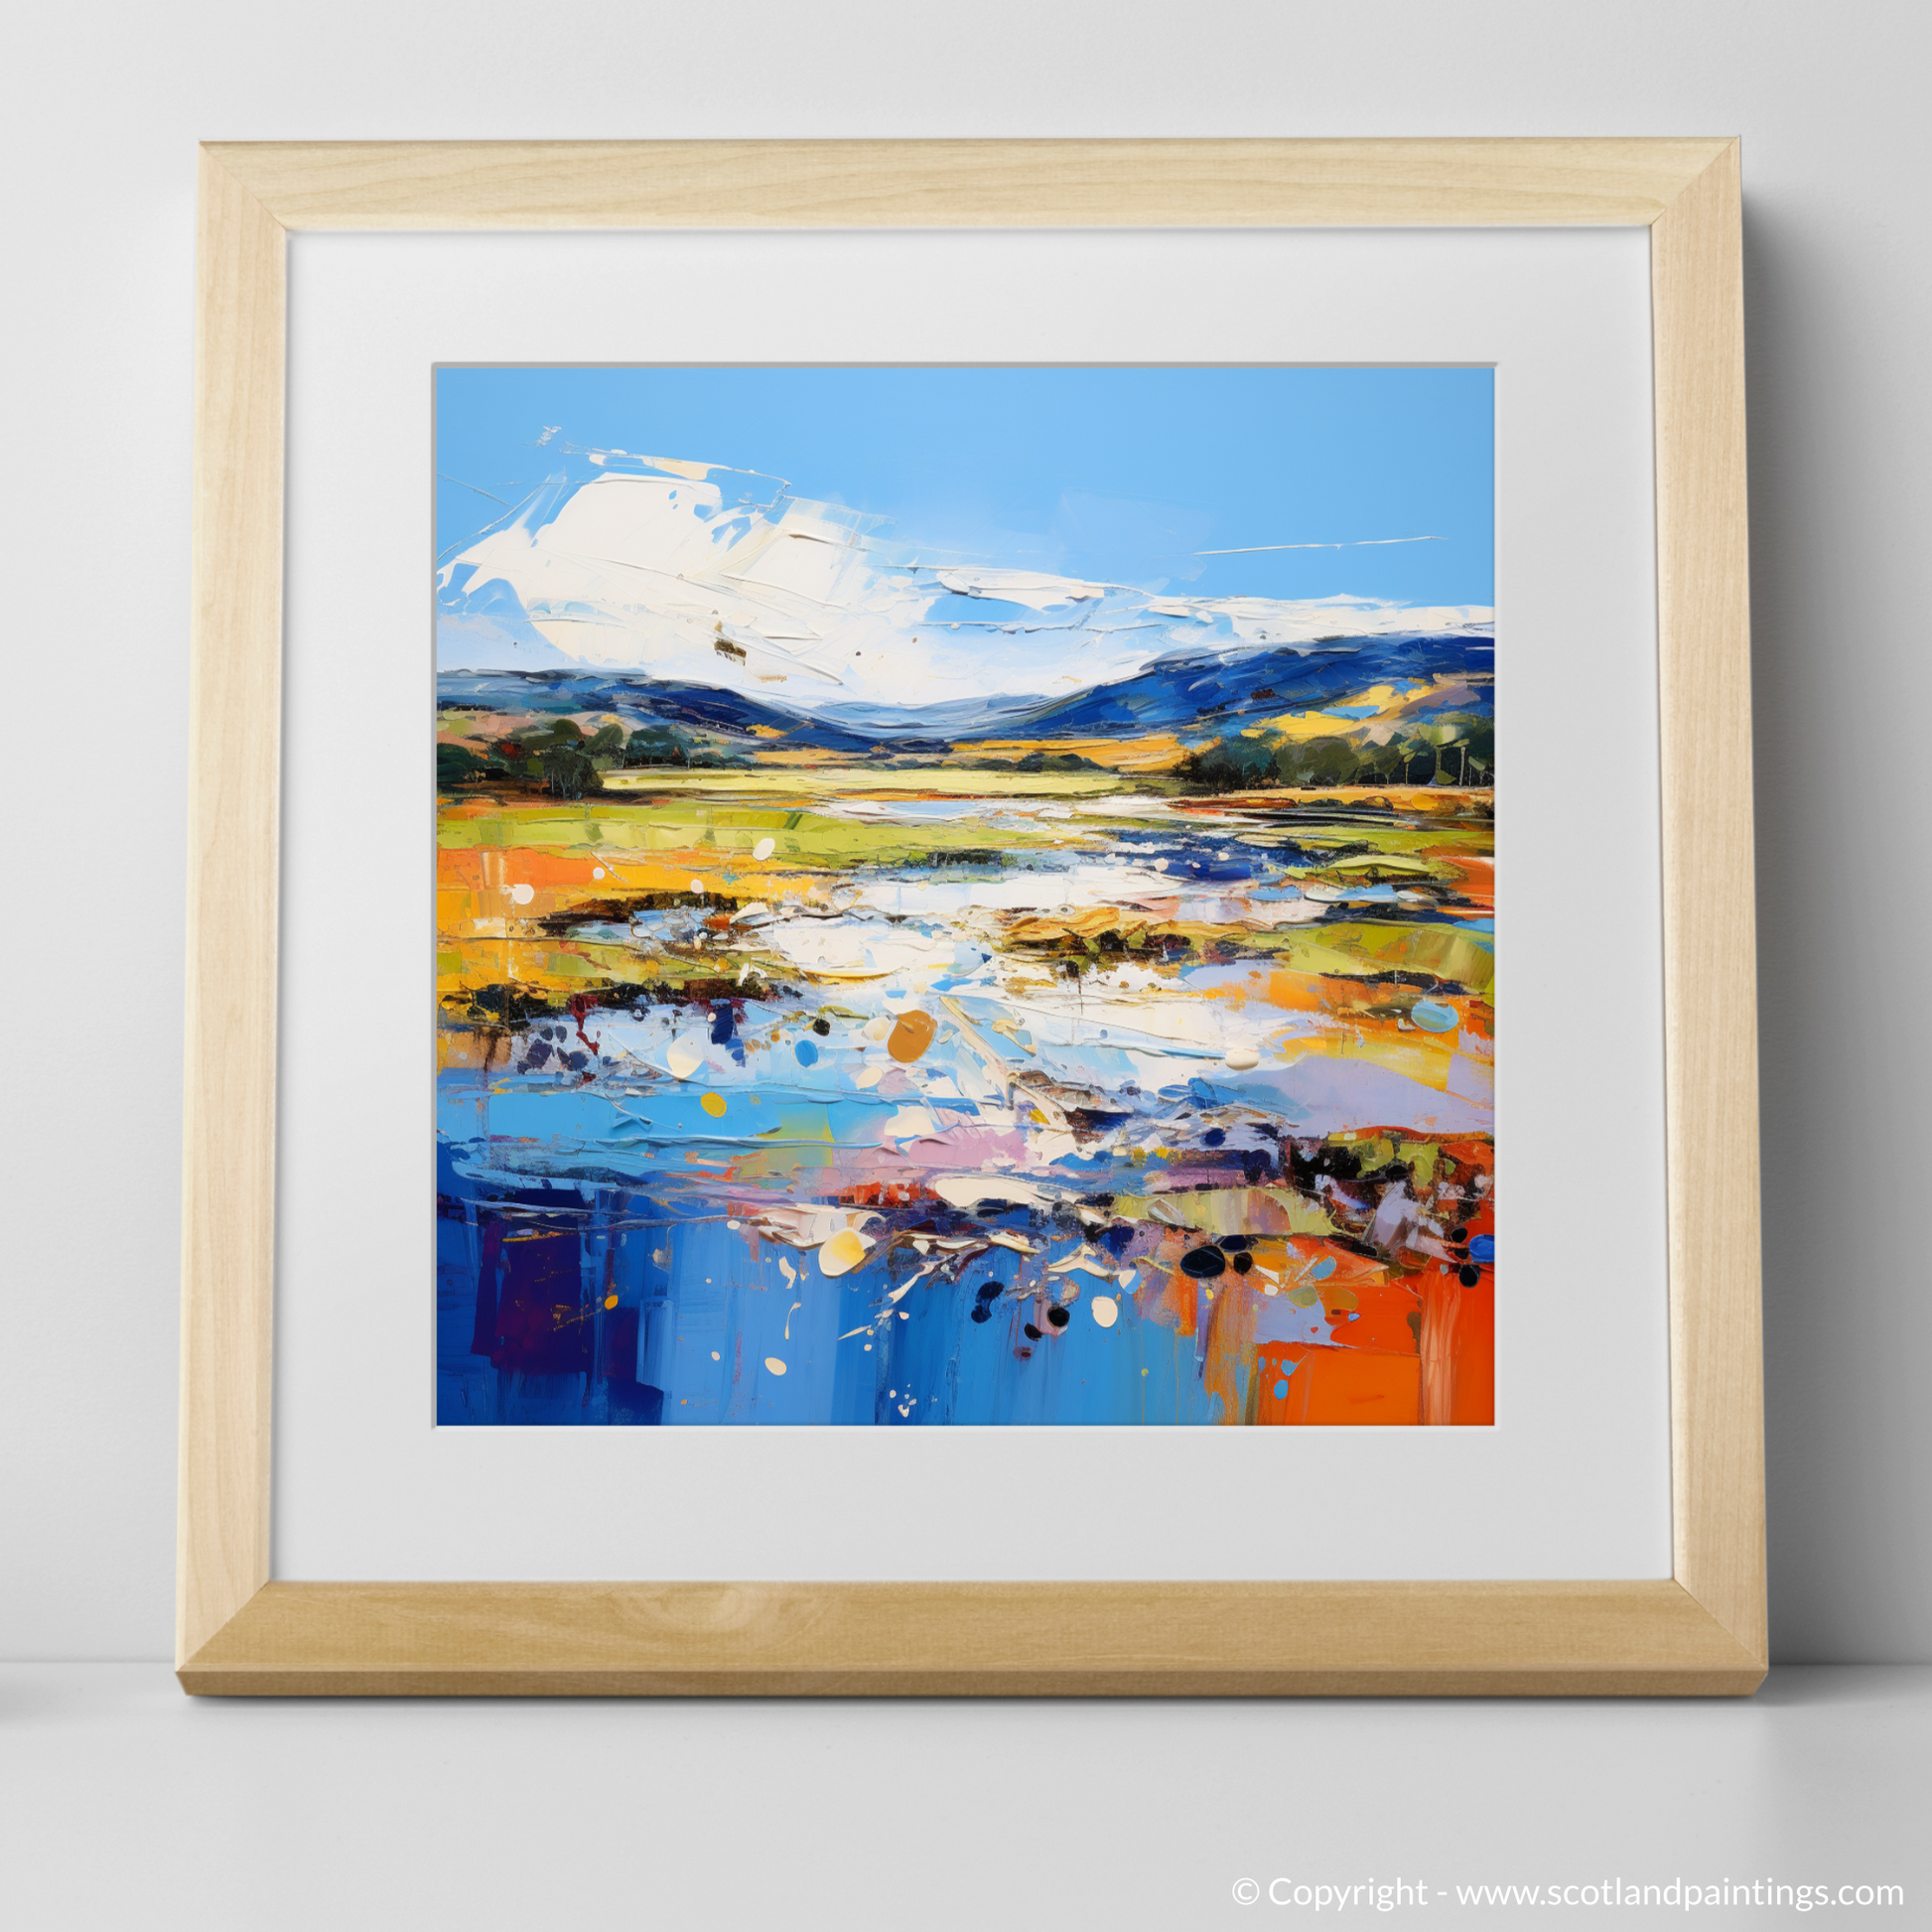 Art Print of Loch Doon, Ayrshire in summer with a natural frame